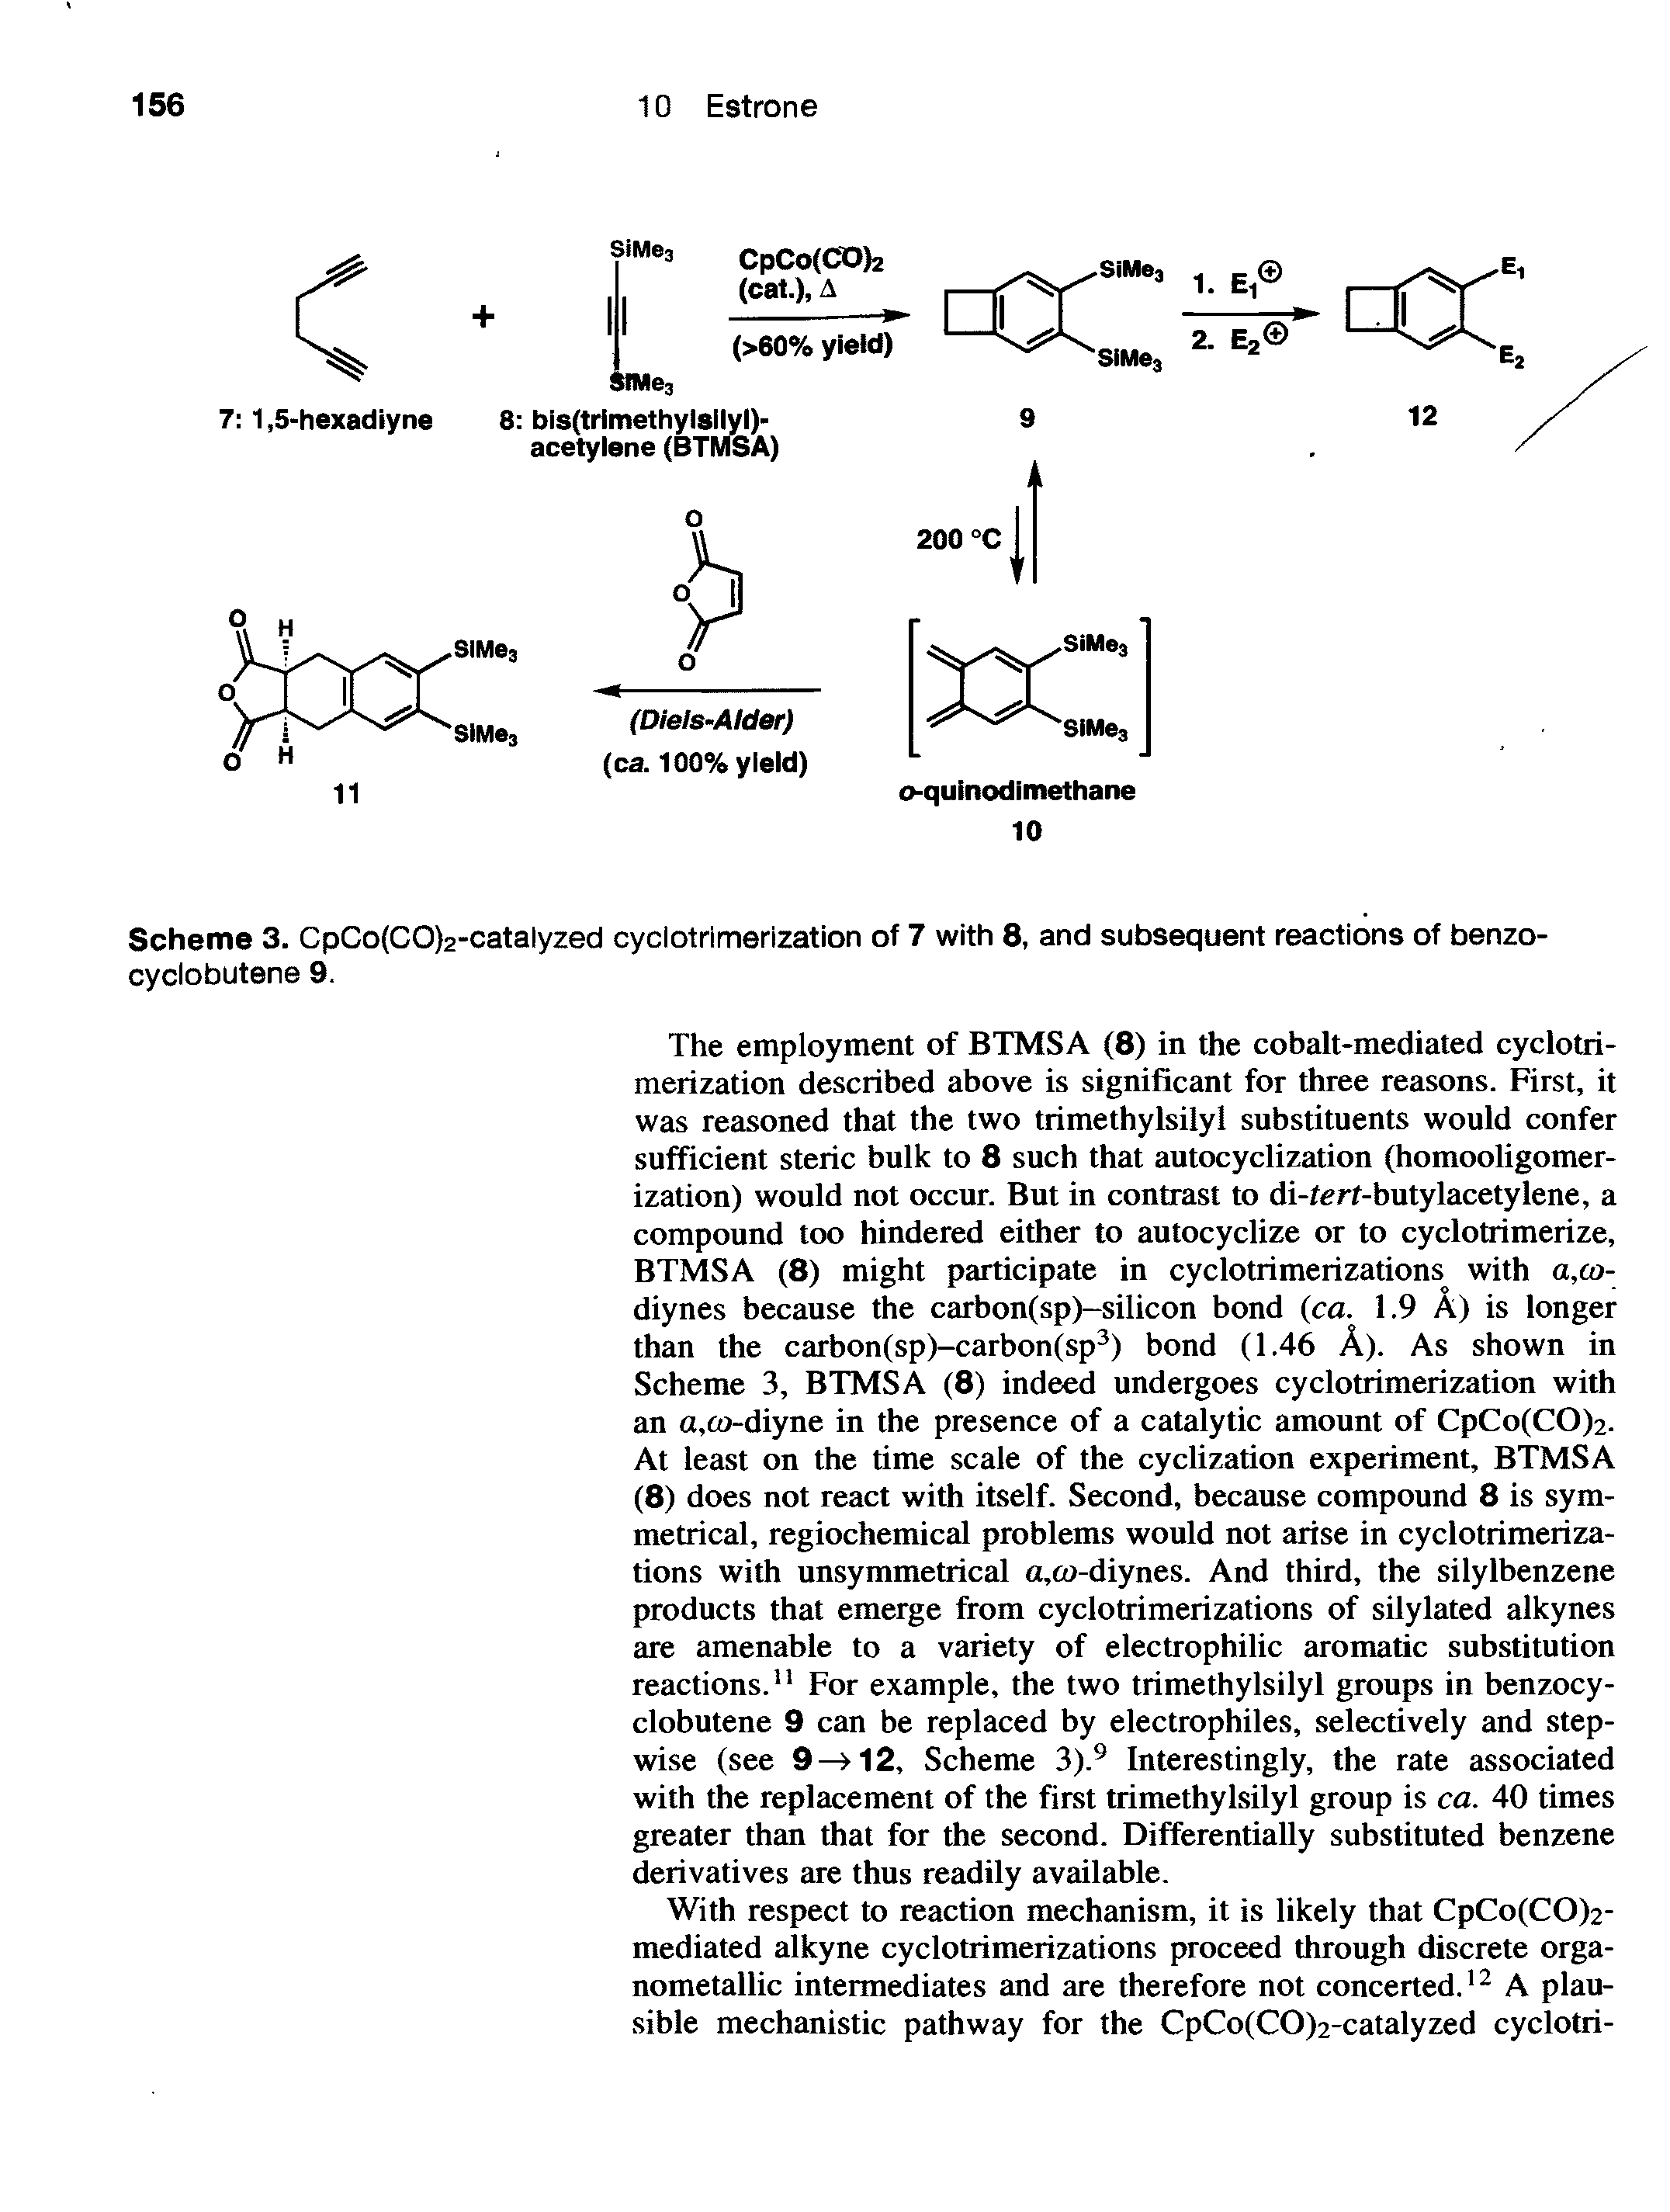 Scheme 3. CpCo(CO)2-catalyzed cyclotrimerization of 7 with 8, and subsequent reactions of benzo-cyclobutene 9.